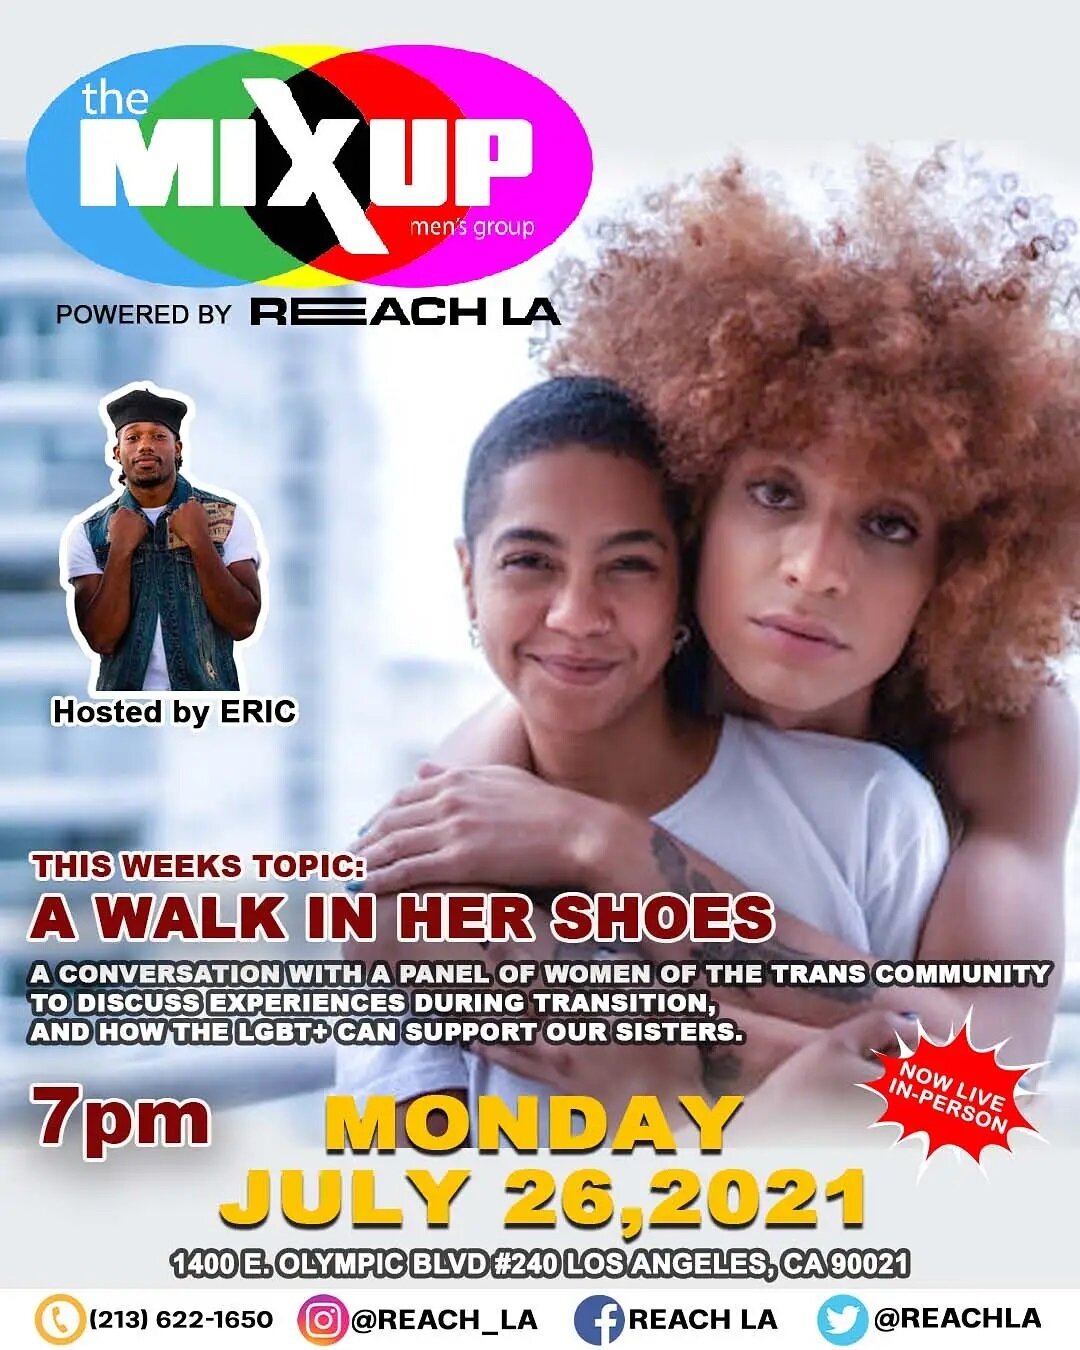 THE MIX-UP🔴🟠🟢🔵🟤🟡
Every Monday @ 7pm 👈🏽
Hosted by Eric 🎤🎙️
Come Get #Mixxy On Mondays At #TheMixUp
NOW LIVE IN-PERSON 🎤🗣️
Our topic for next week will be: 
&quot;A WALK IN HER SHOES &quot; 
(A conversation with a panel of women of the tran